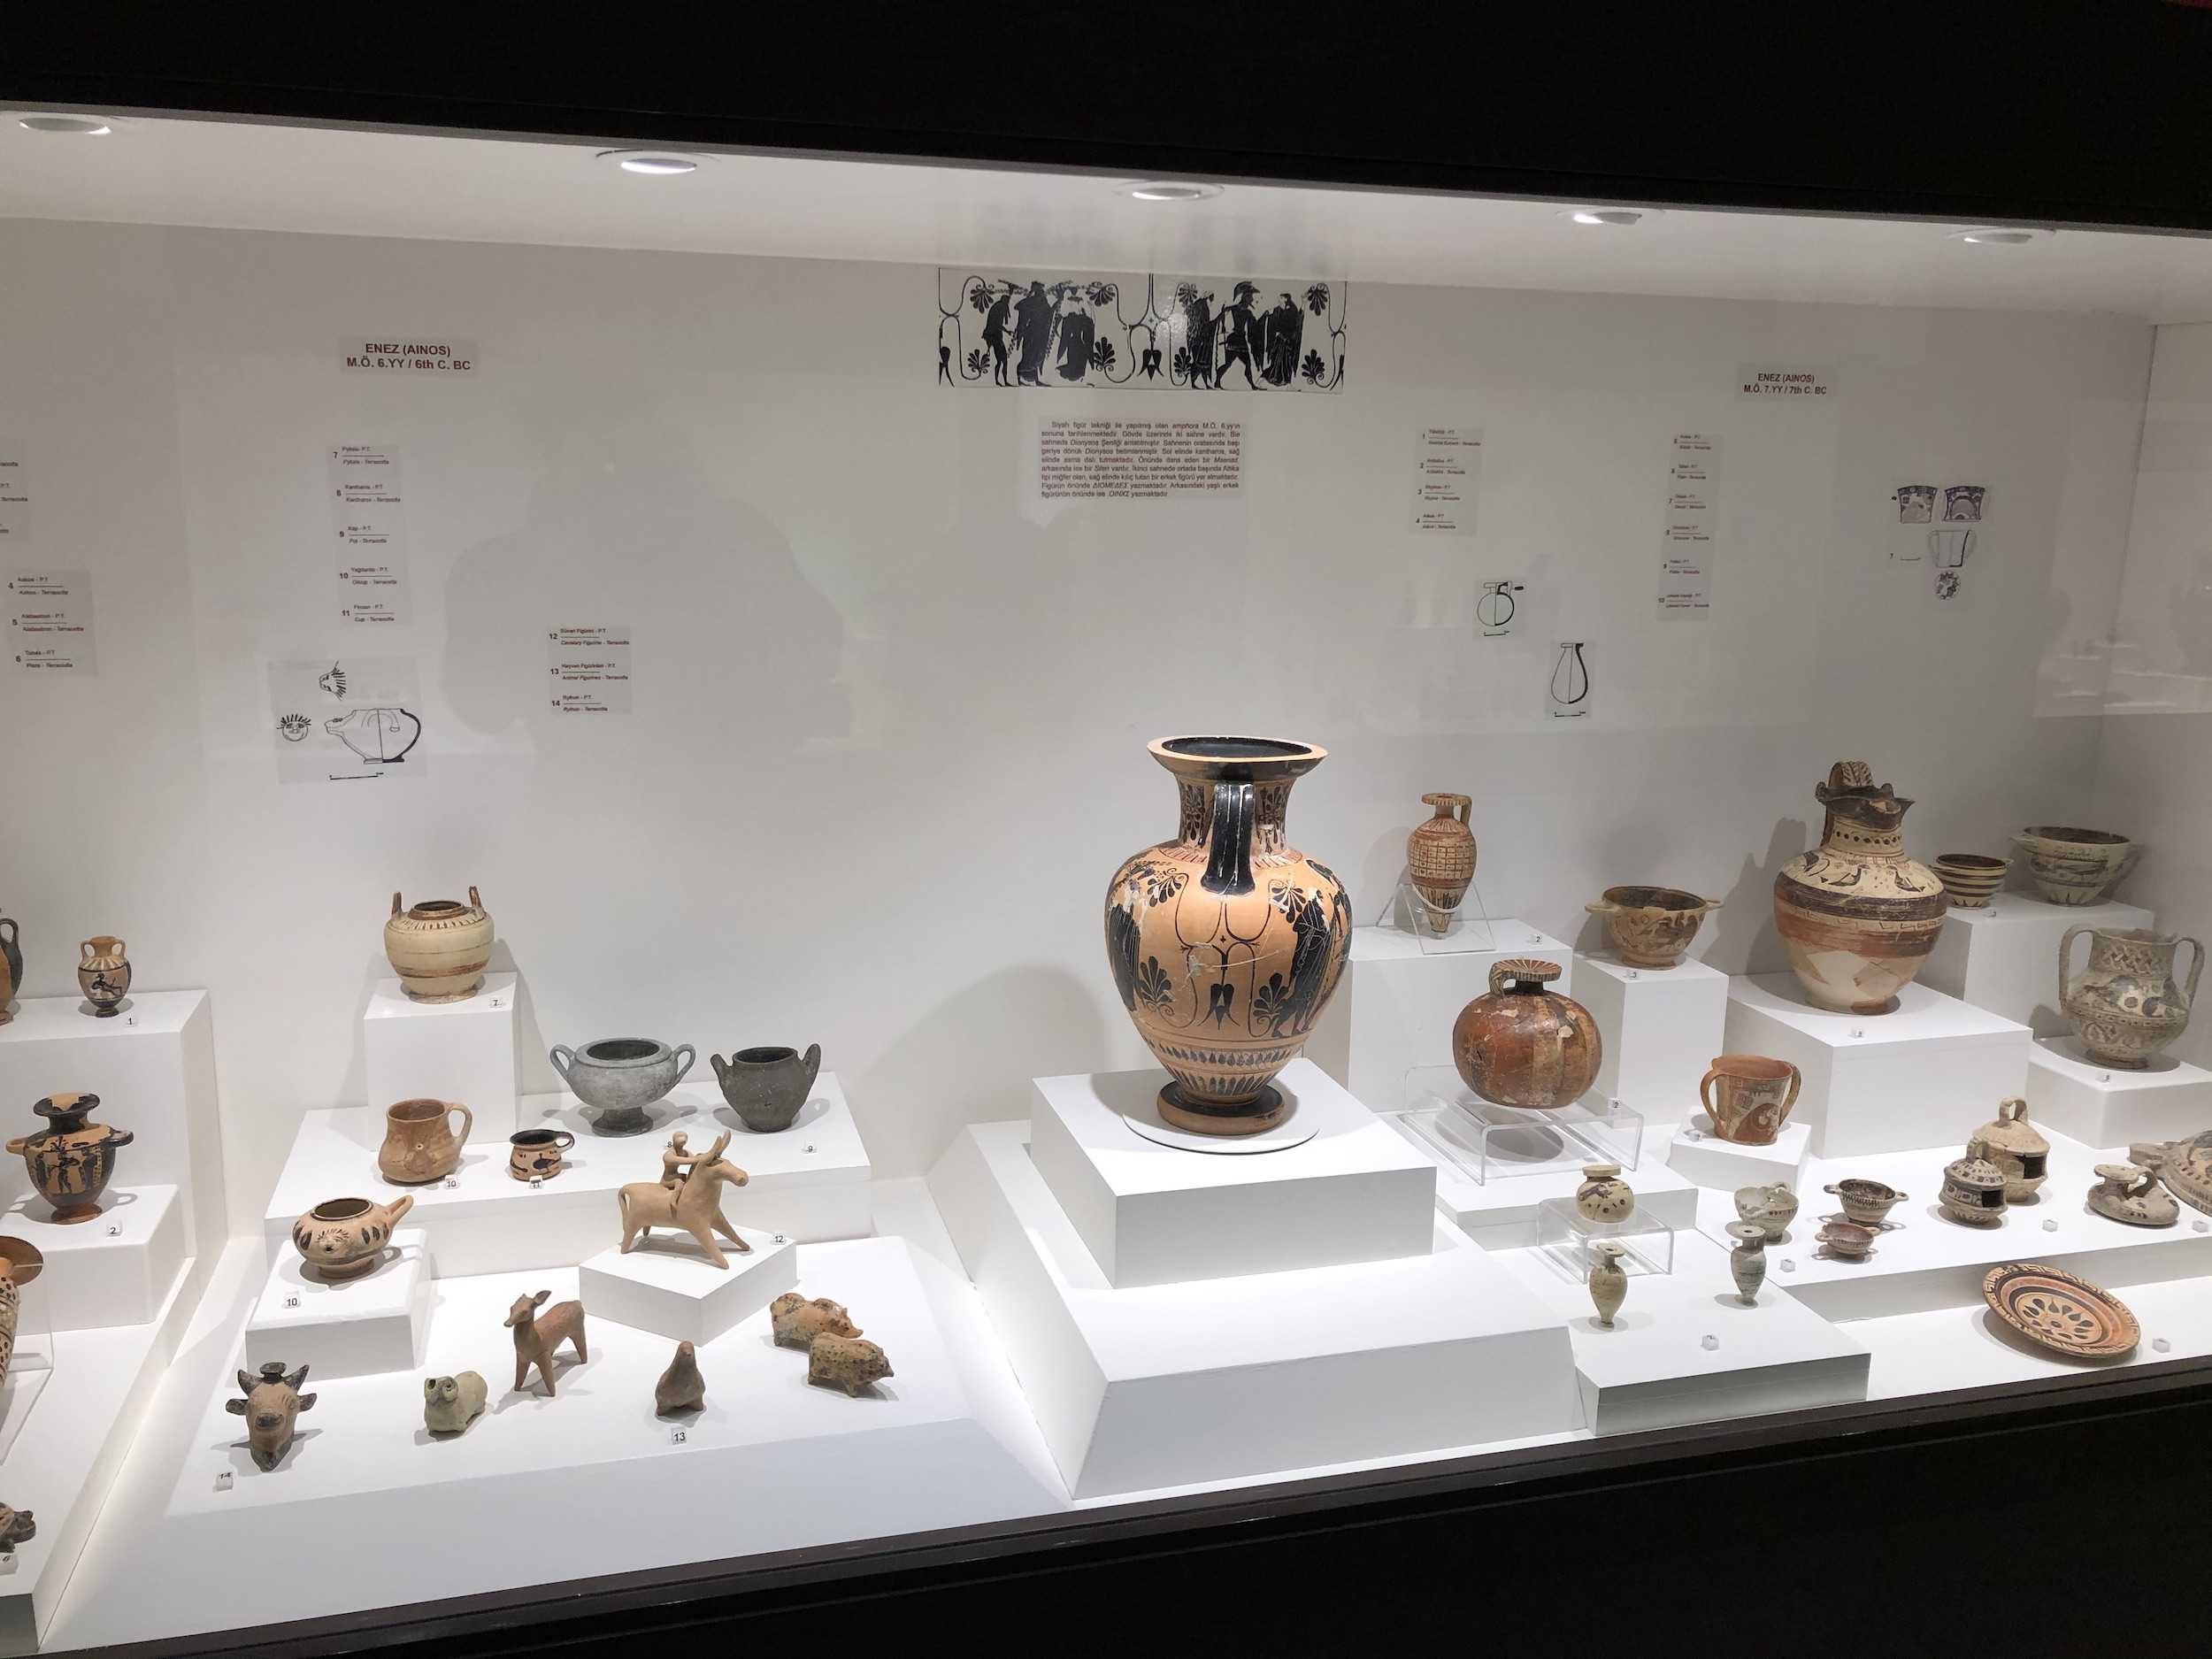 Artifacts excavated from Ainos at the Edirne Archaeology and Ethnography Museum in Edirne, Turkey